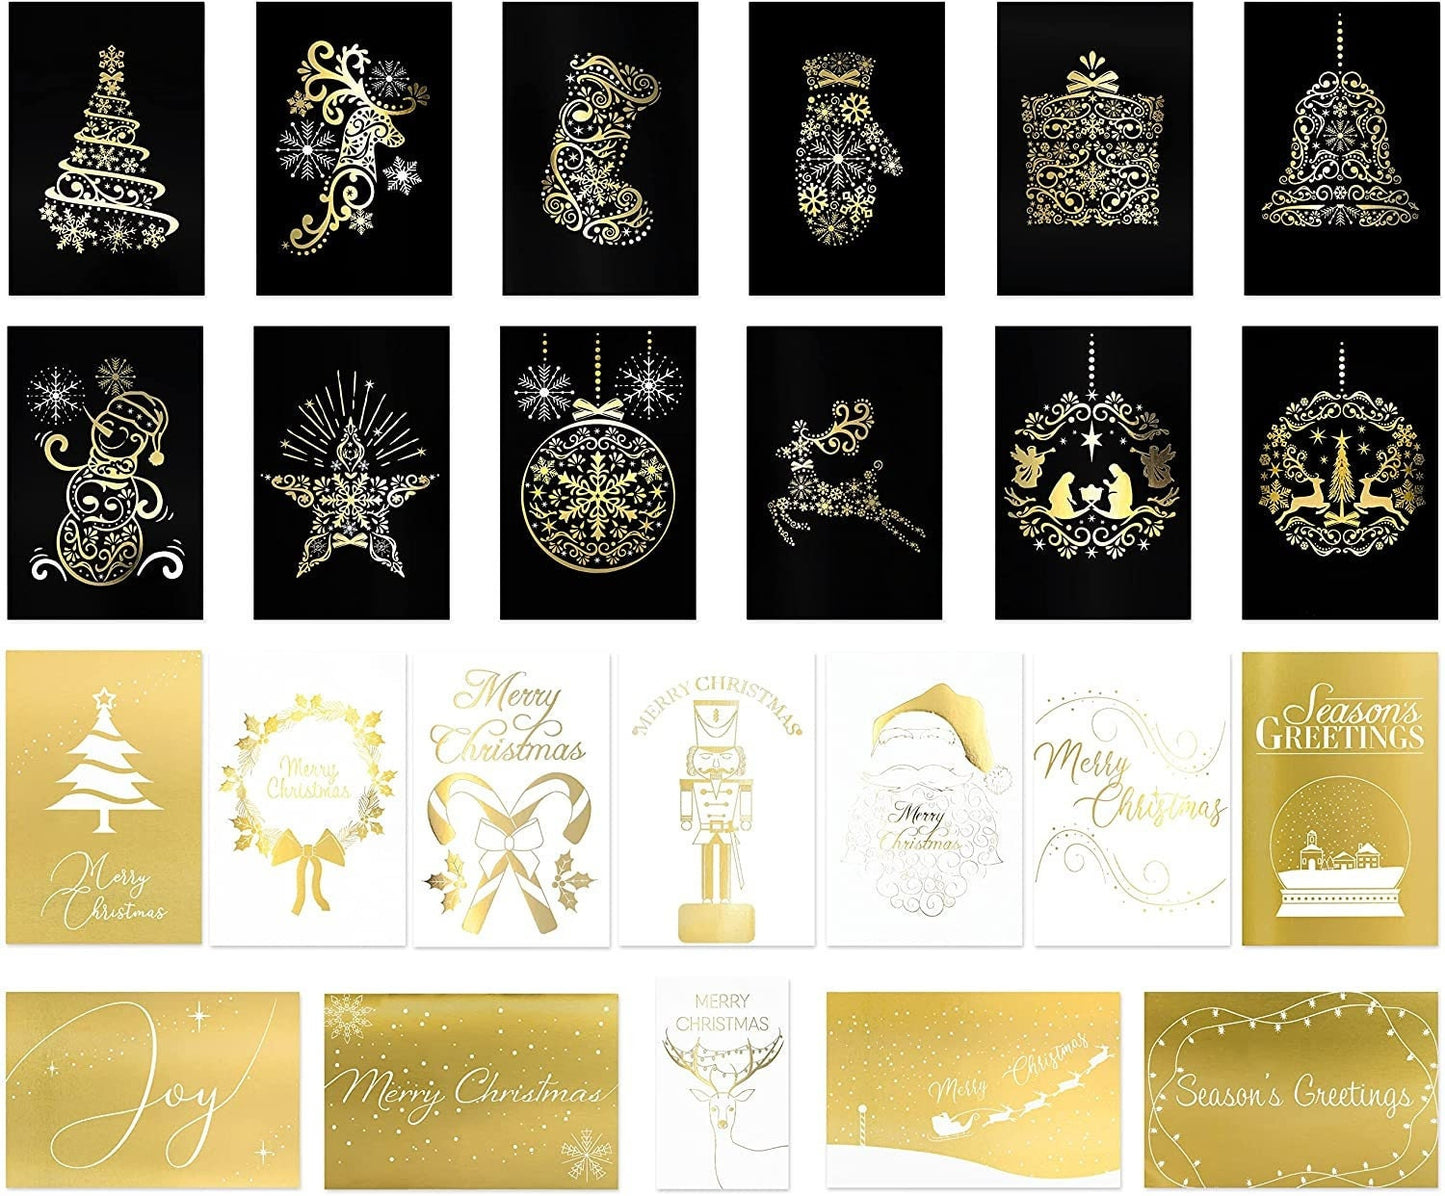 Christmas Cards - 24ct Holiday Greeting Cards - Gold Foil Card Set and Kraft Paper Envelopes - Blank interior